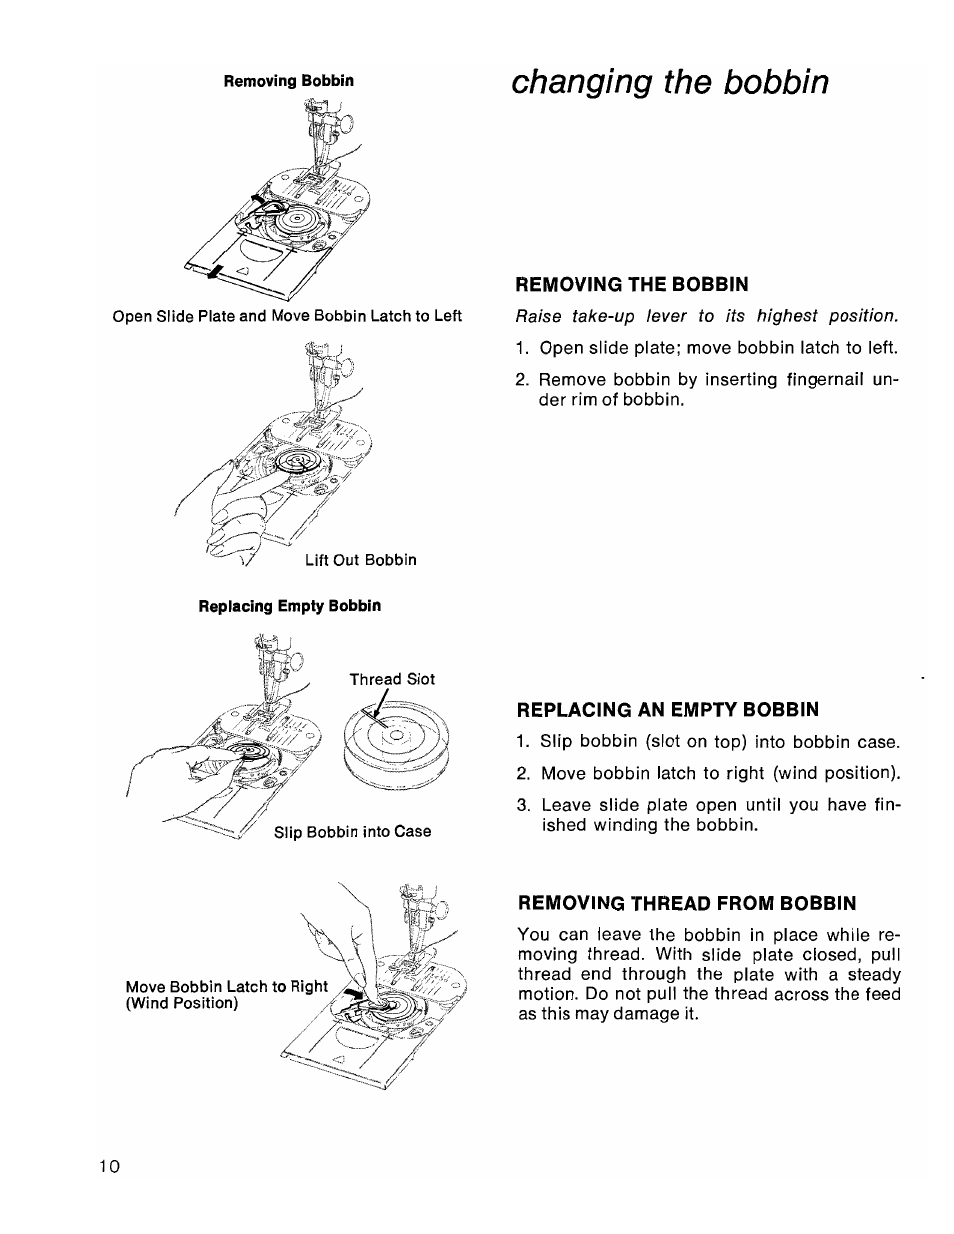 Changing the bobbin, Removing the bobbin, Replacing an empty bobbin | Removing thread from bobbin | SINGER 1036 Creative Touch User Manual | Page 15 / 66